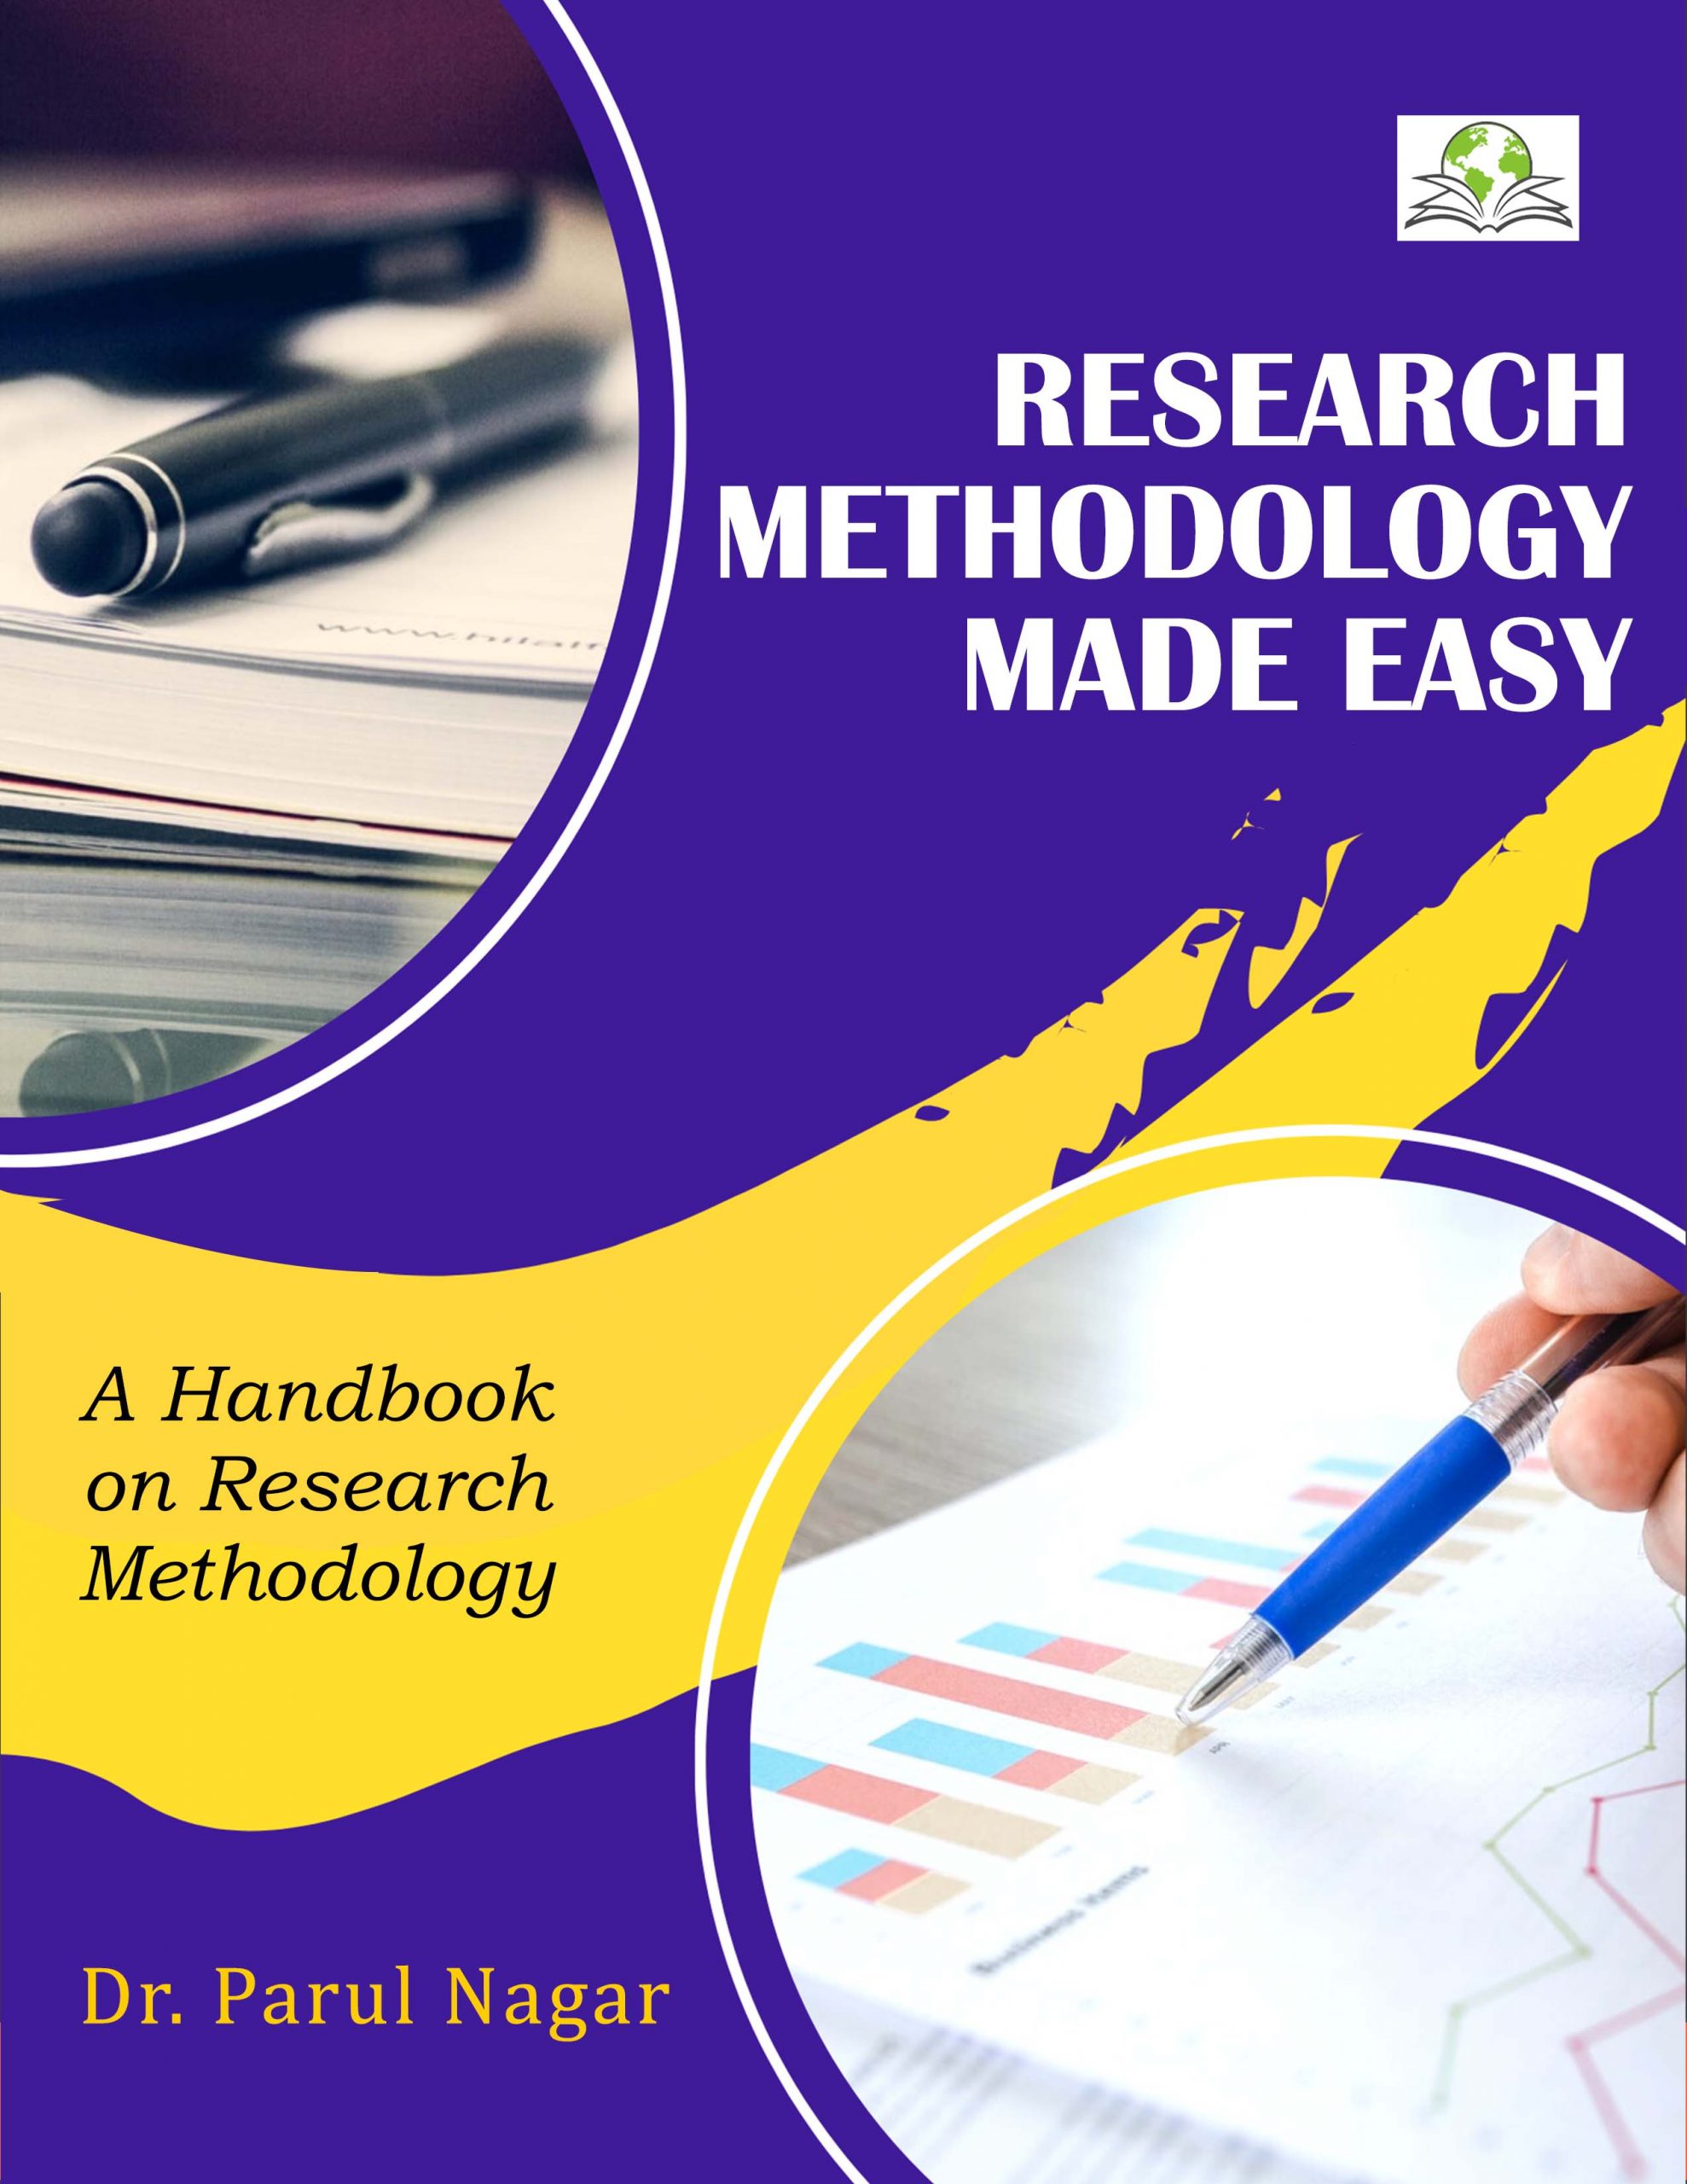 a book on research methodology